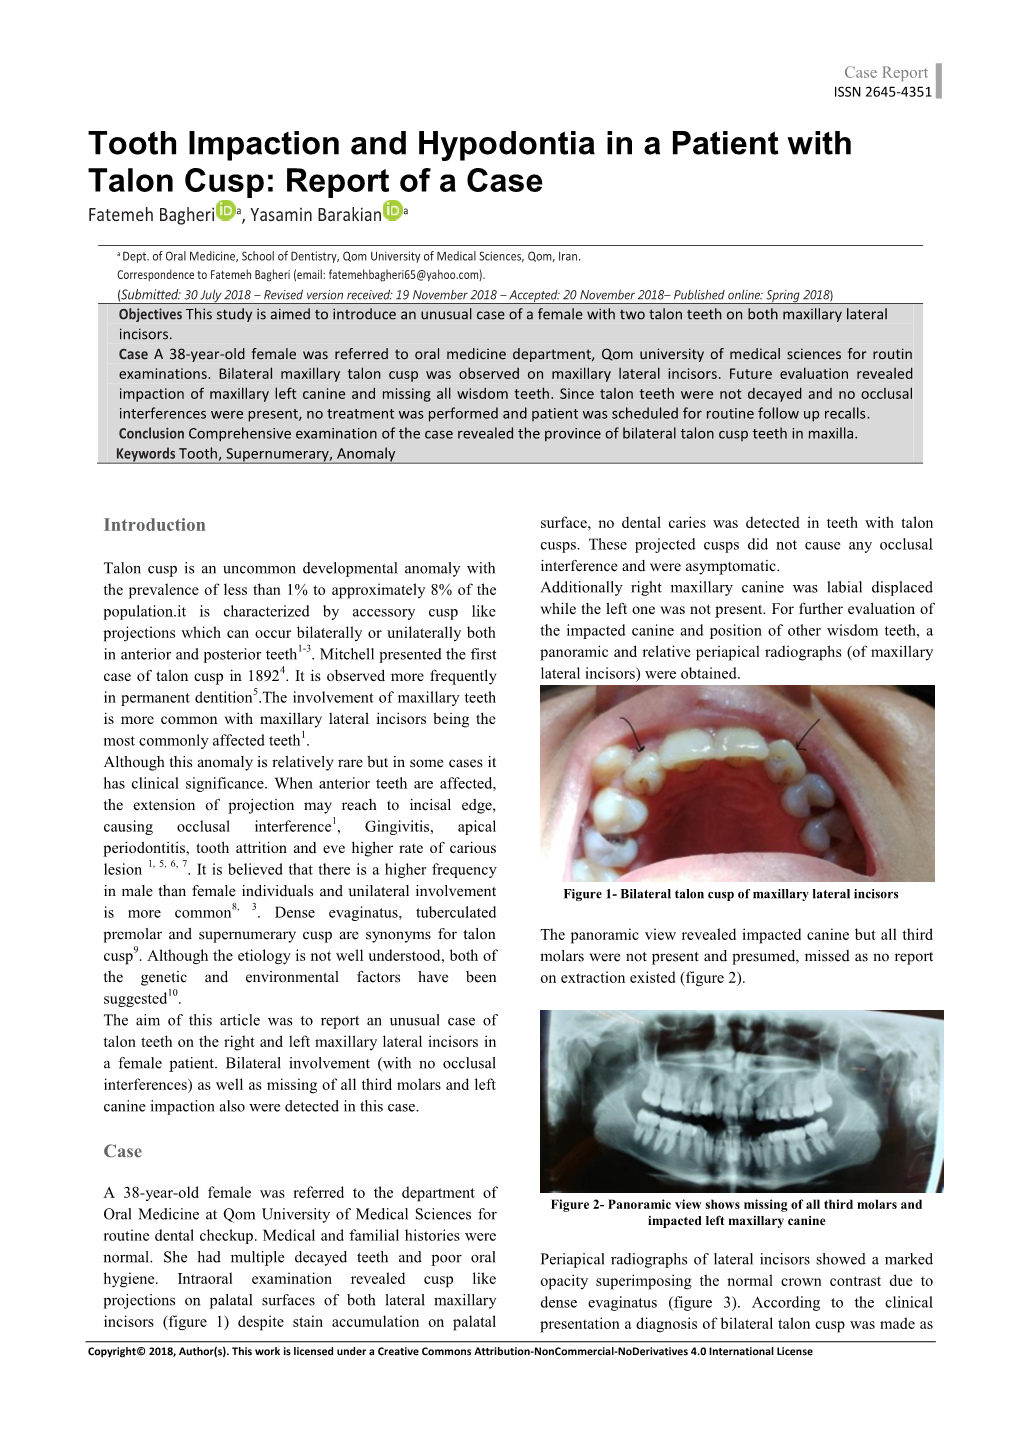 Tooth Impaction and Hypodontia in a Patient with Talon Cusp: Report of a Case a a Fatemeh Bagheri , Yasamin Barakian